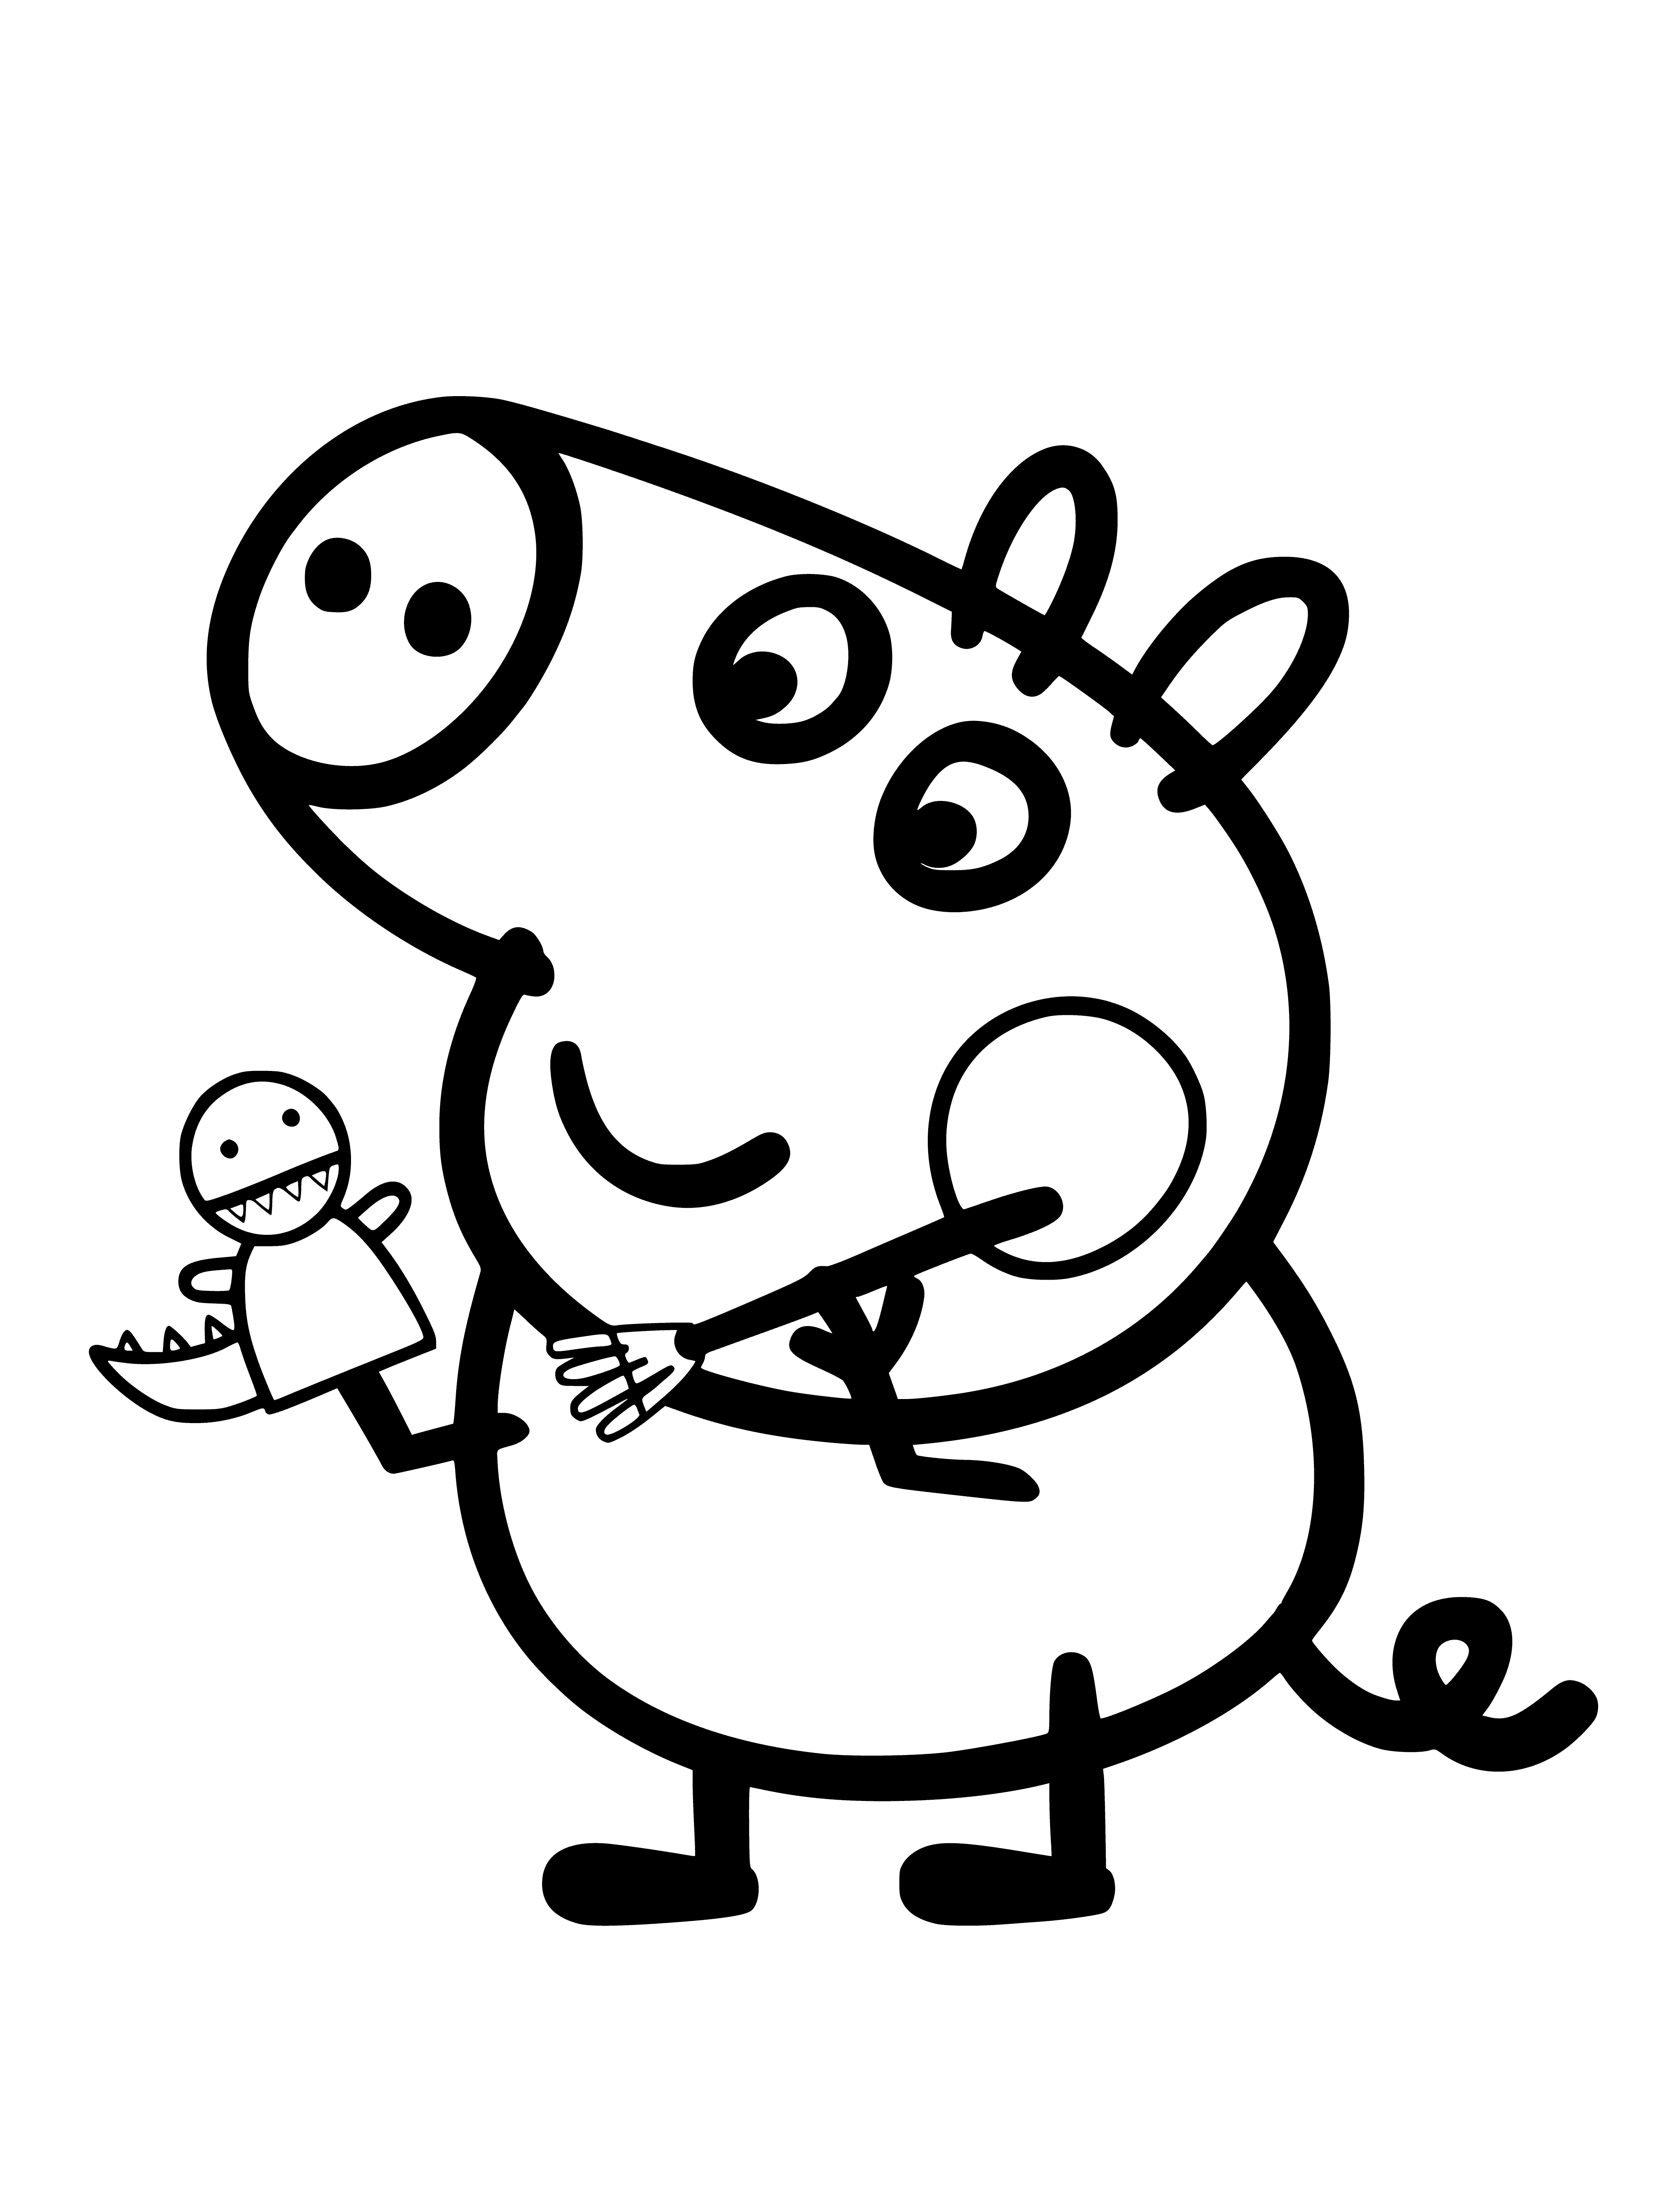 coloring page: Peppa and George play with a toy; George sits with it and Peppa stands nearby looking.